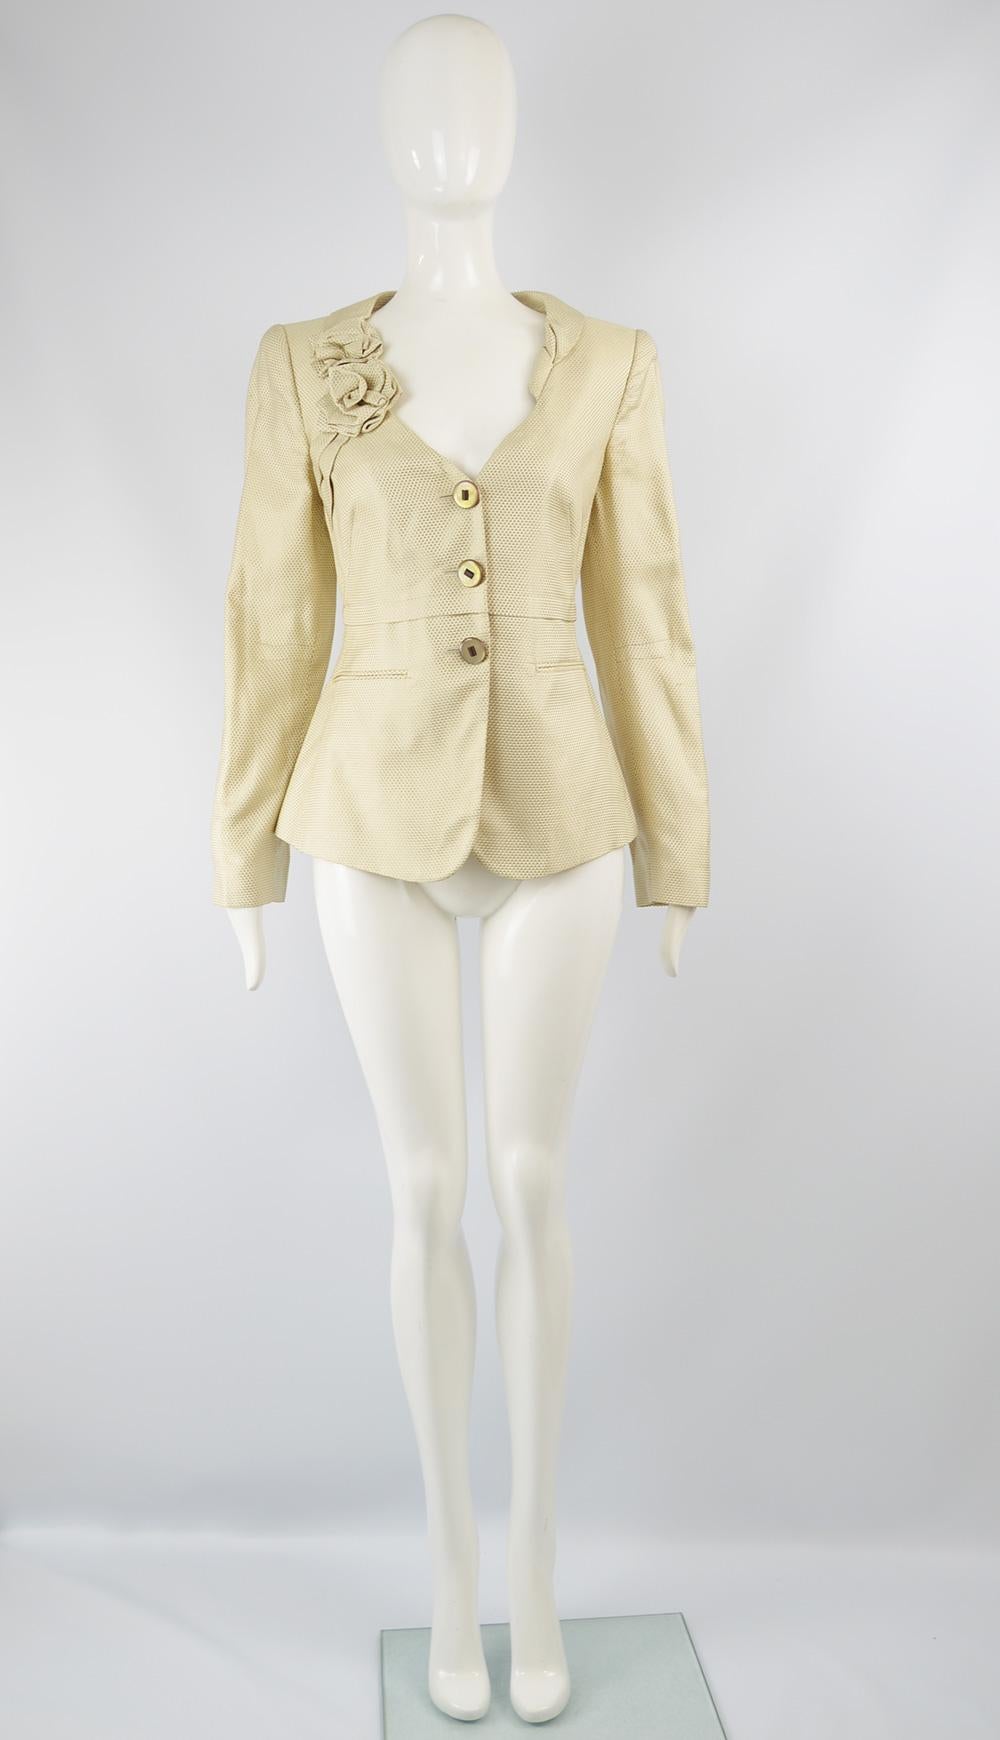 A stunning vintage women's jacket by Giorgio Armani. Made in Italy, in a cream textured rayon and silk brocade / jacquard with folded flowers detailing the asymmetrical lapels. It is beautifully tailored wih a fitted waist and darts shaping the